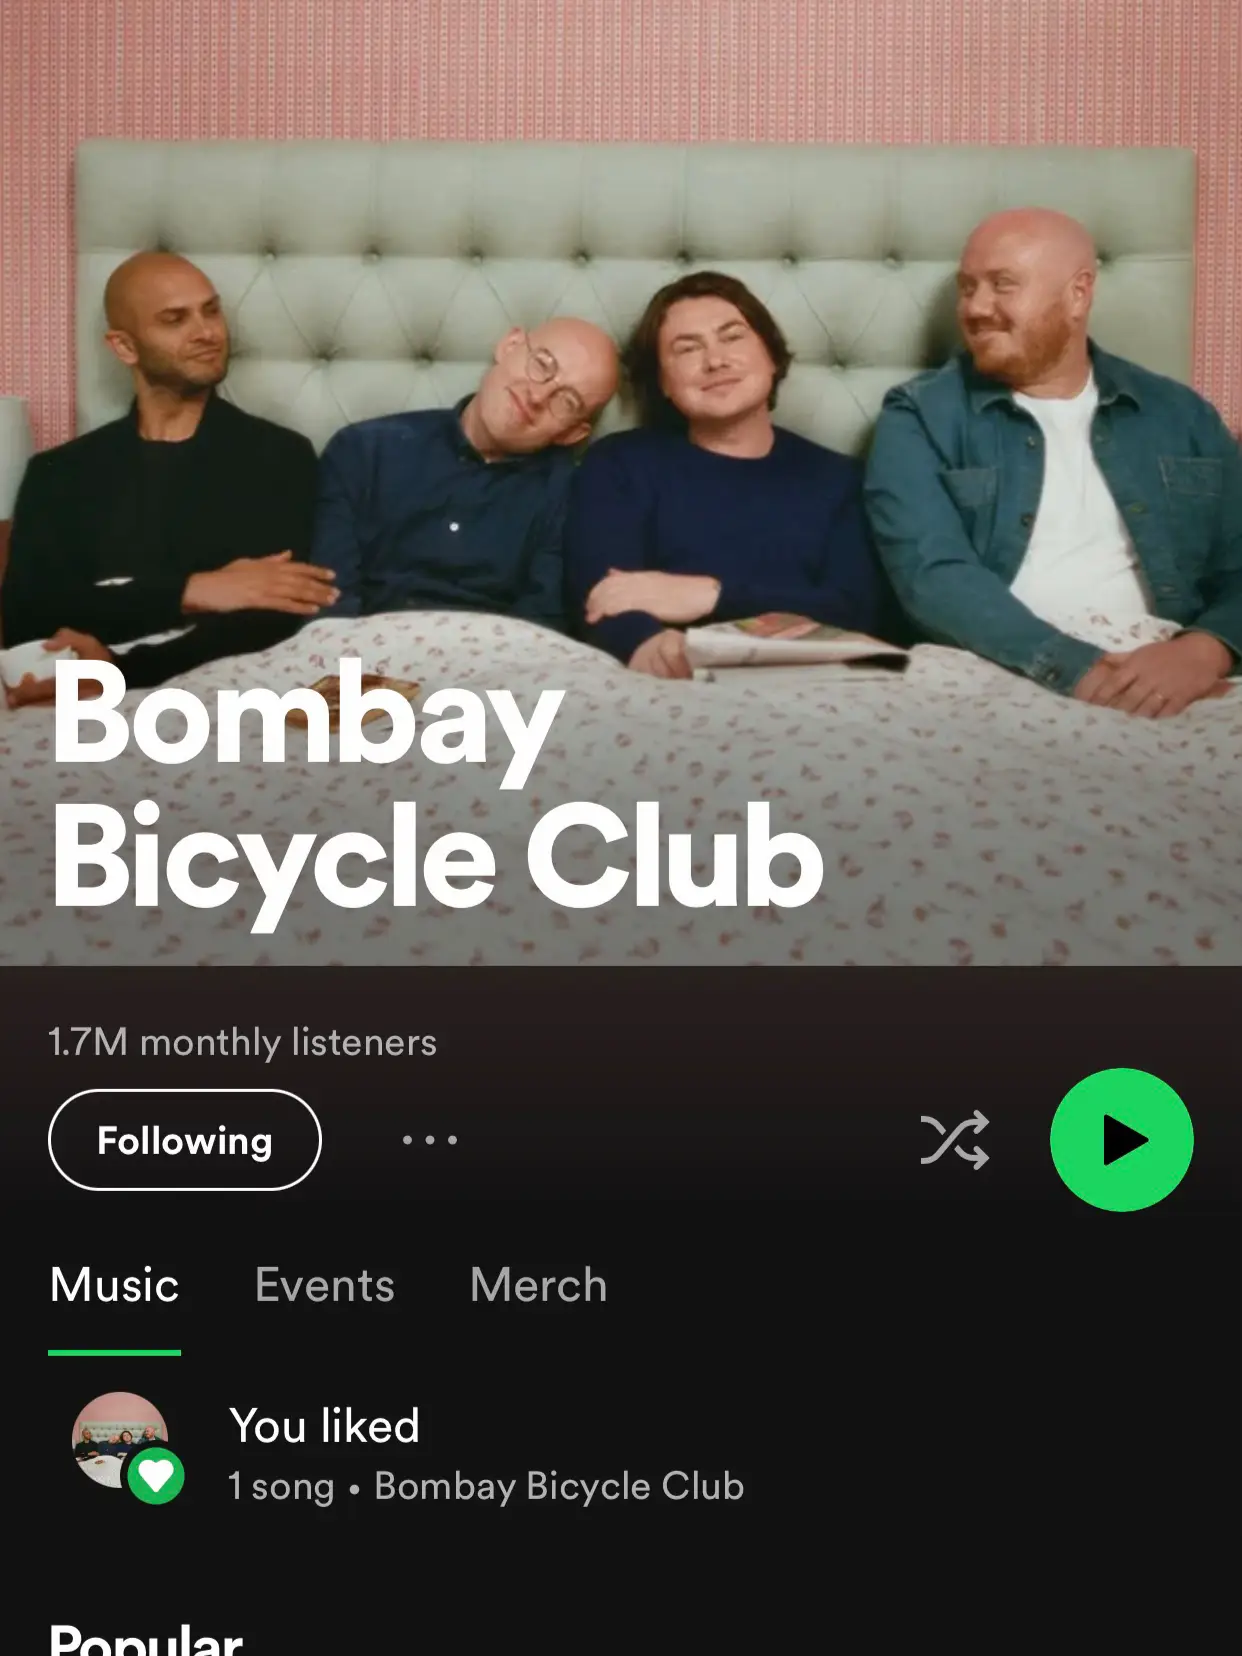  A picture of a band named Bombay Bicycle Club.